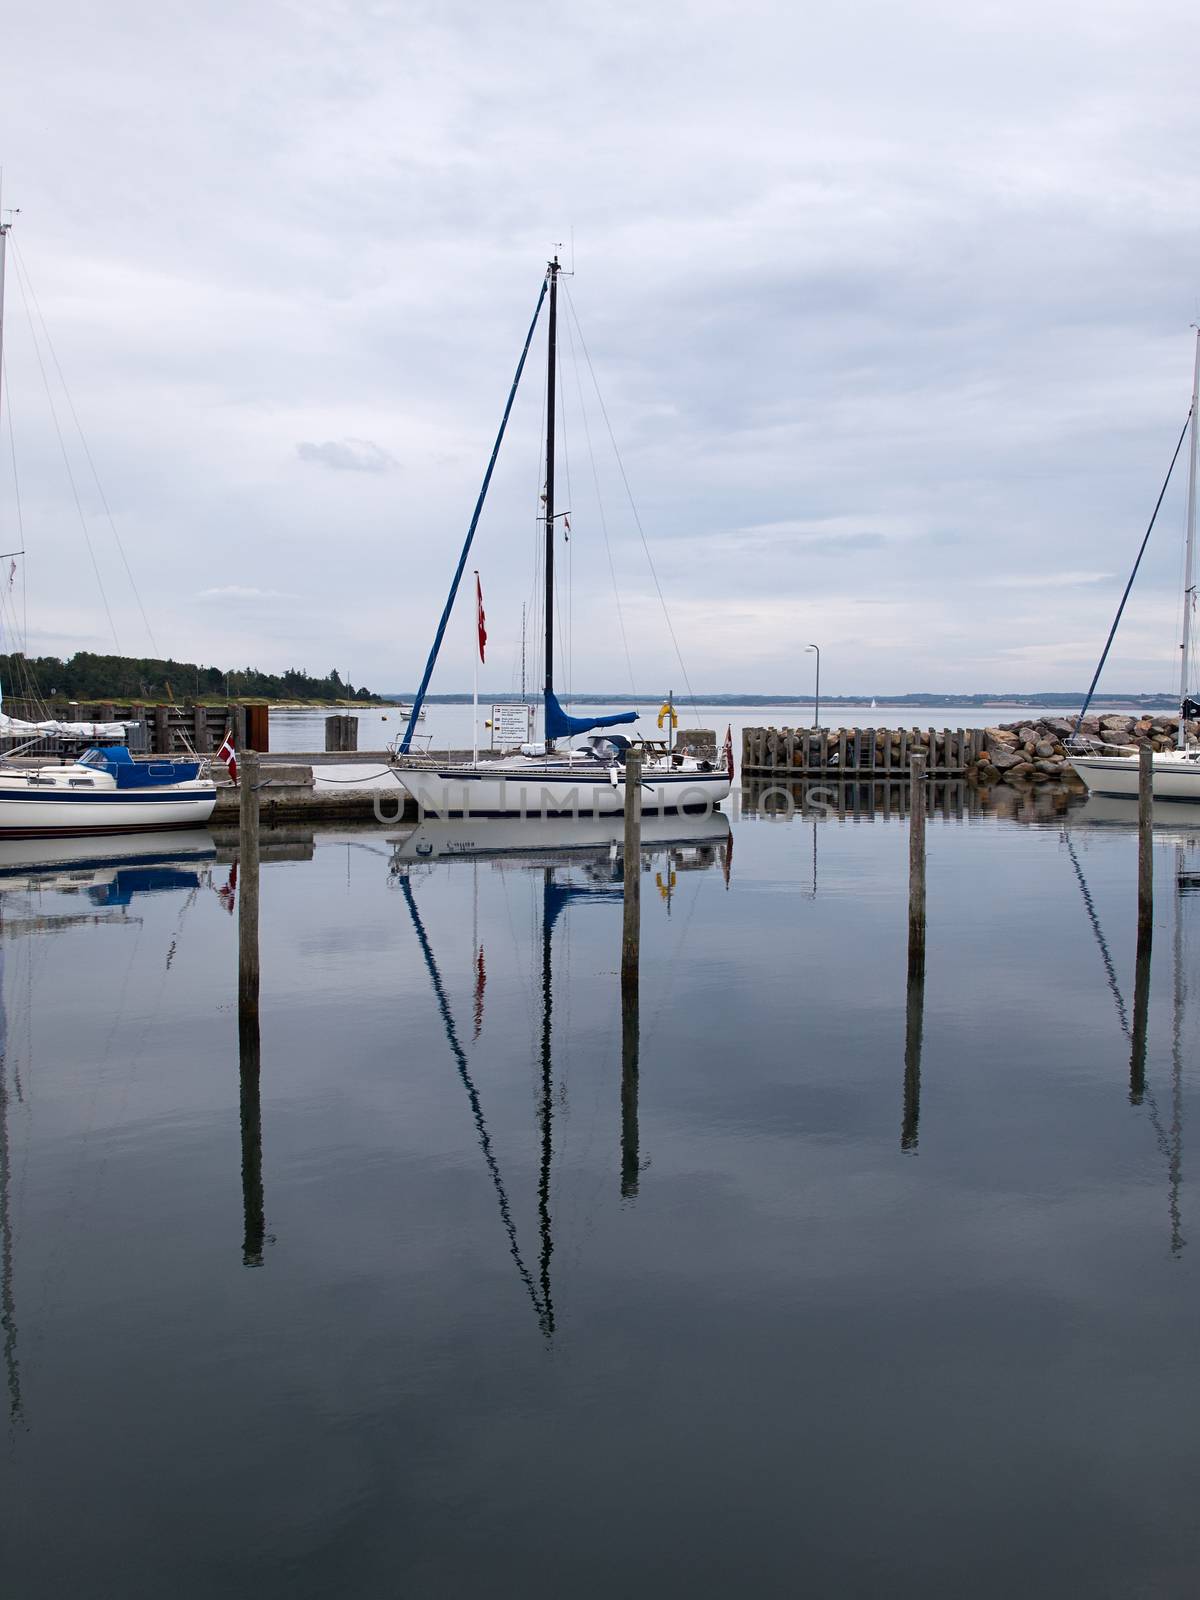 Recreational Sail Yacht in a small marina with reflection in the water     